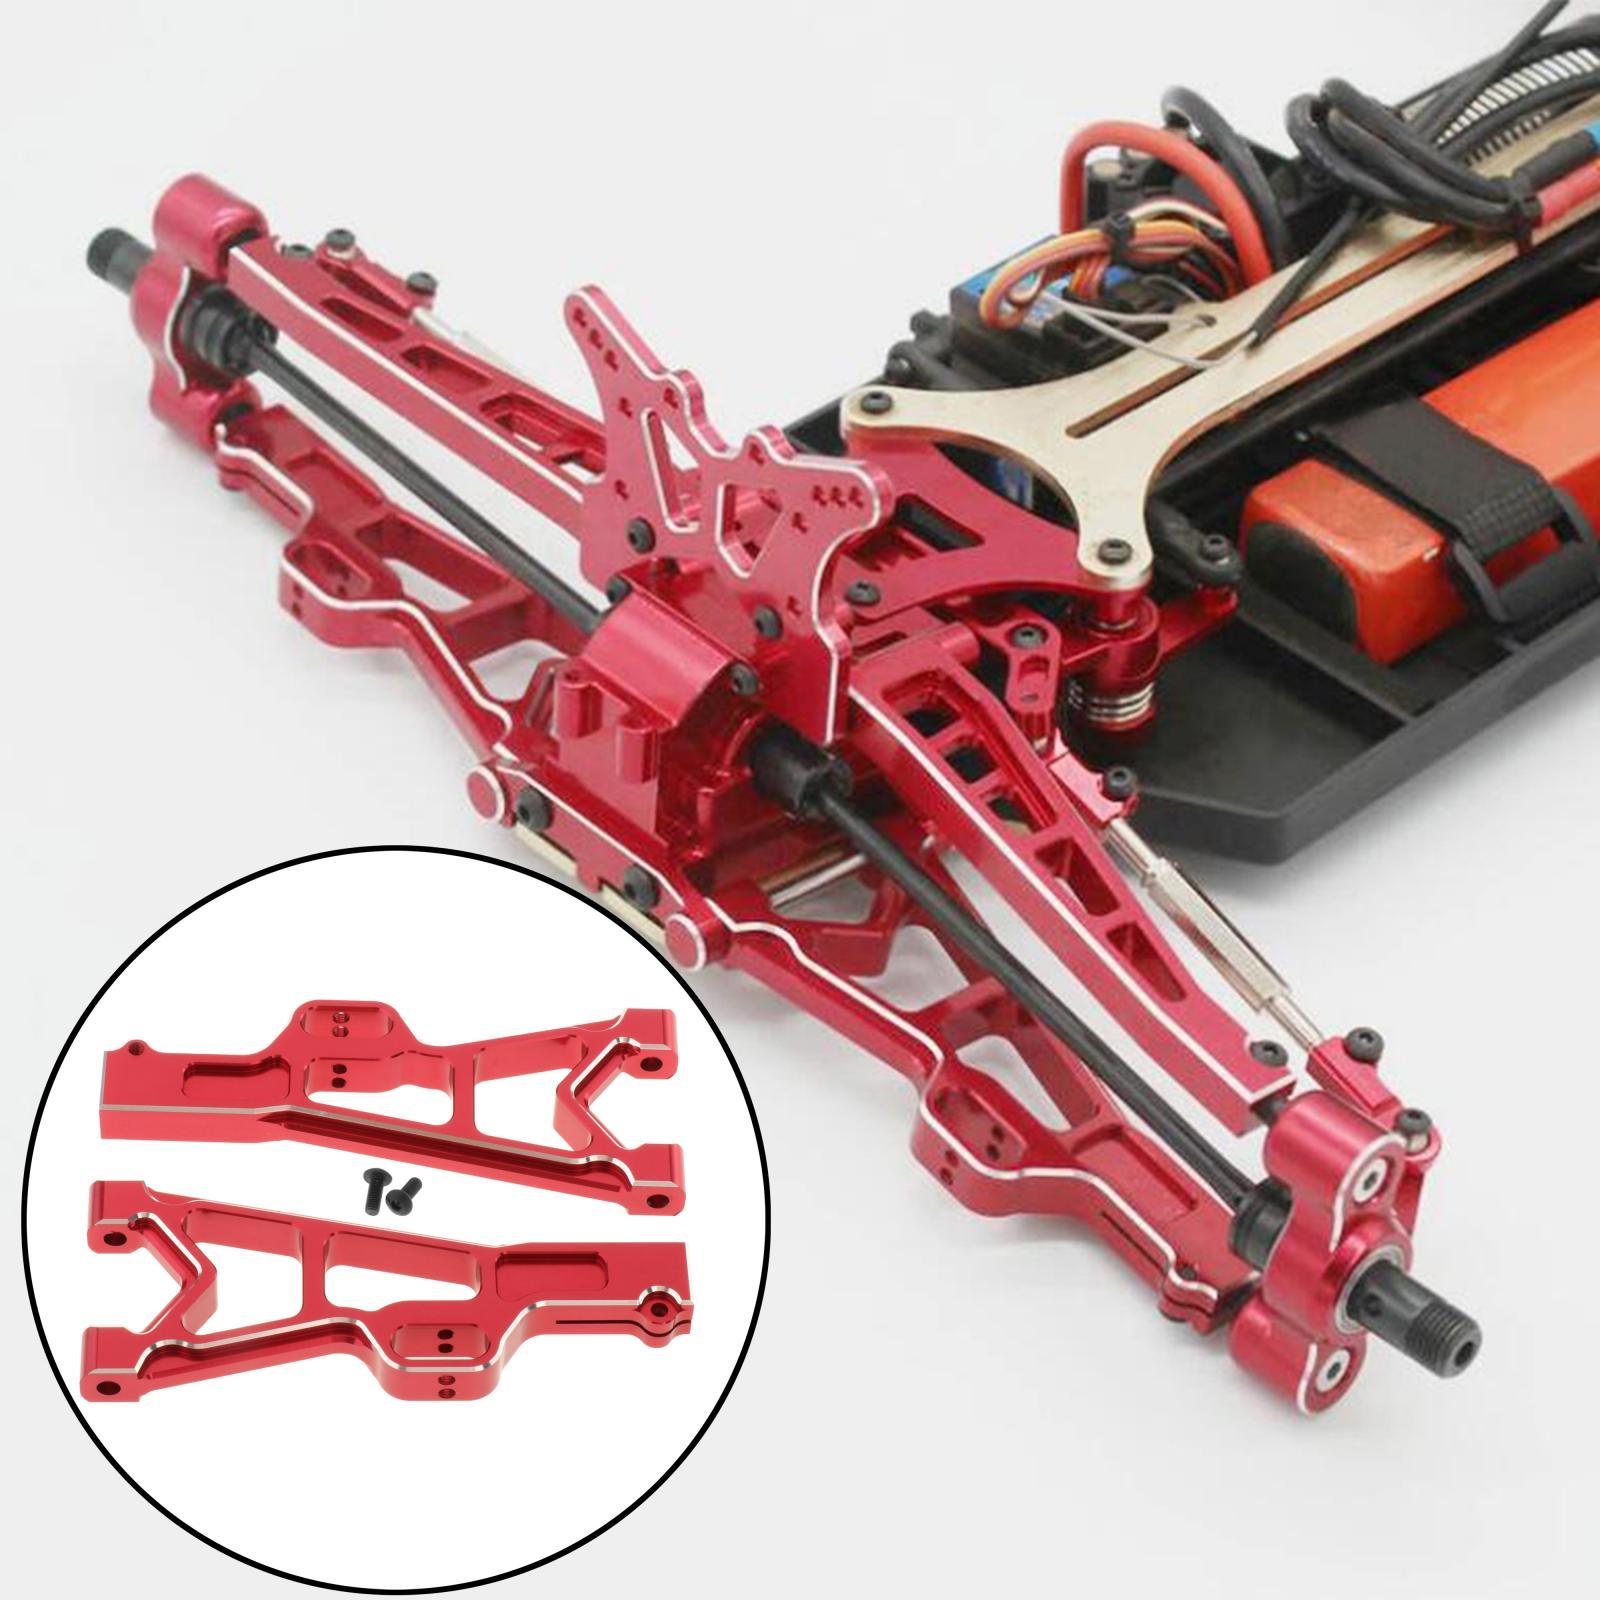 2pcs/set Upgrade Swing Arm for JLB 1/10 RC Car Monster Truck Parts Red